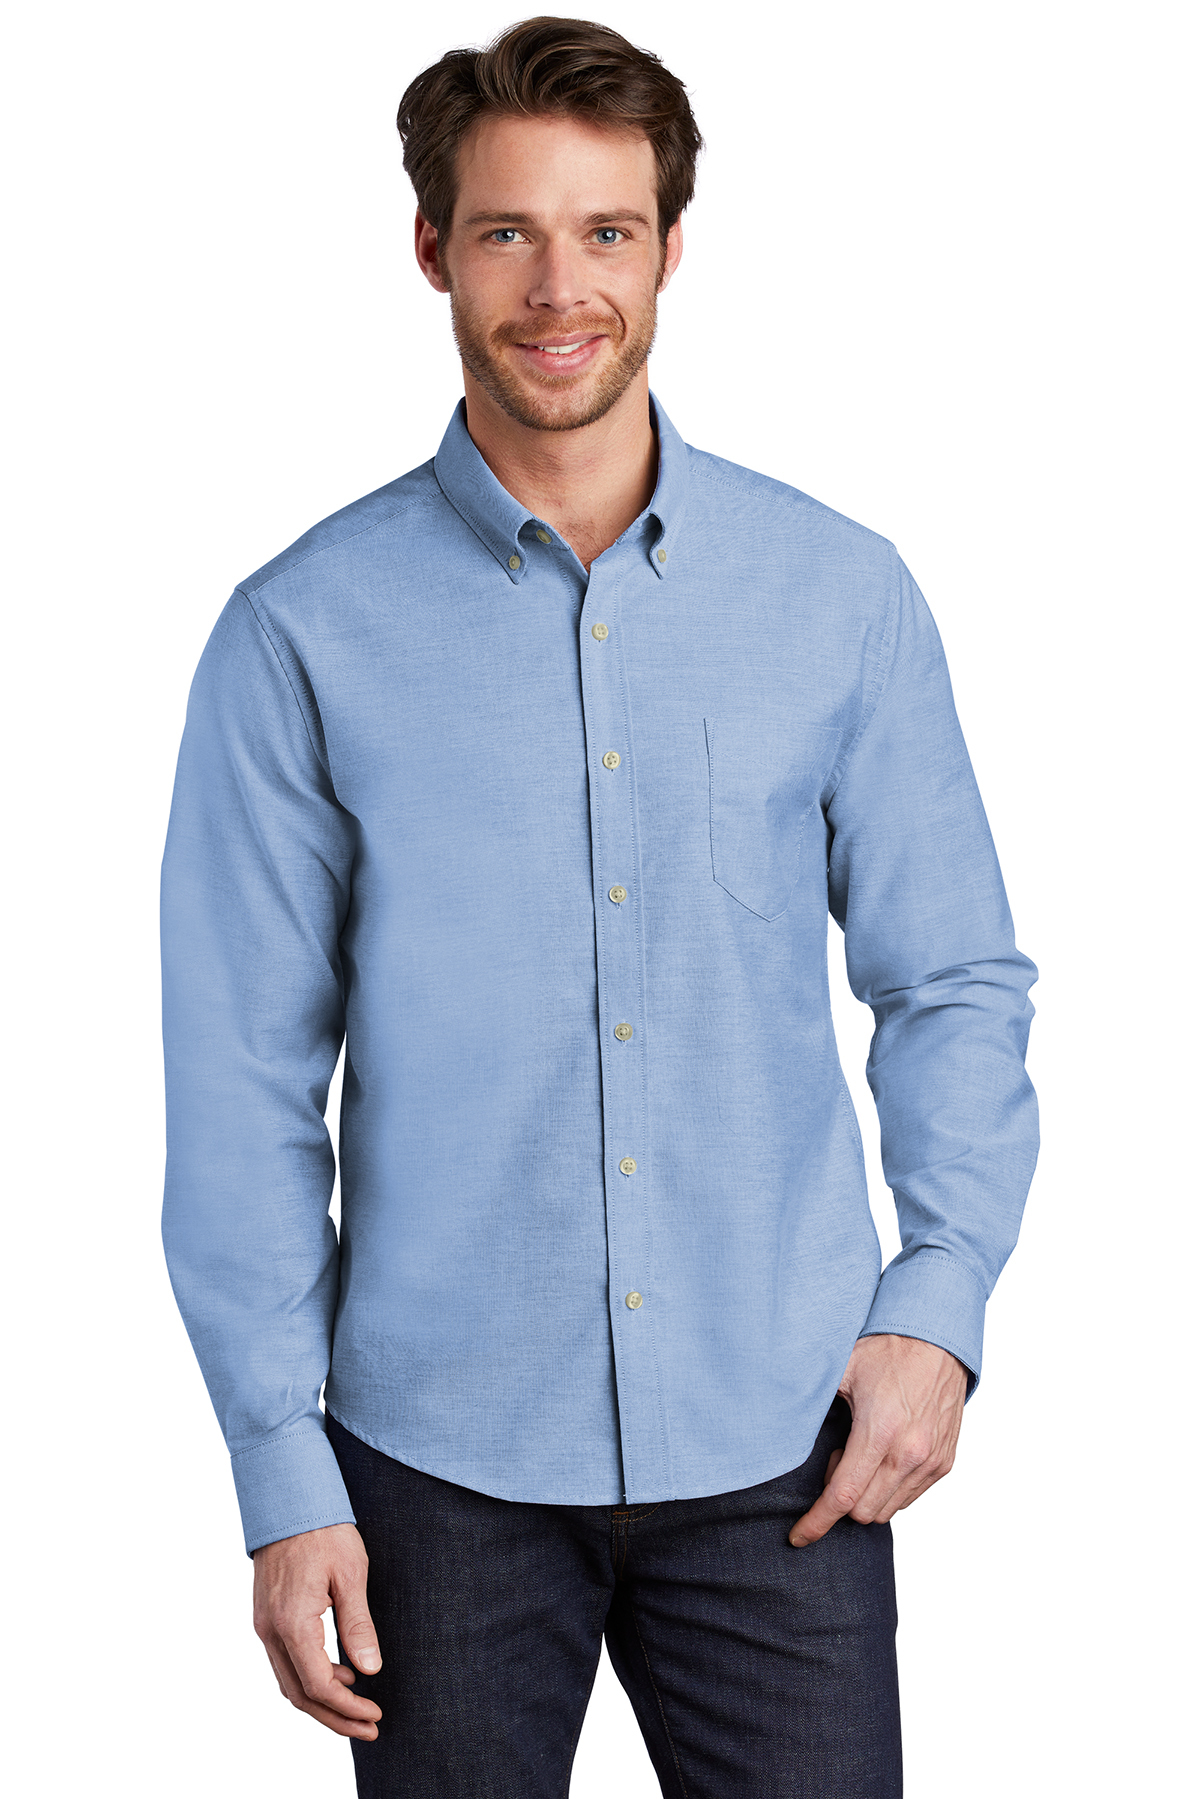 Port Authority Untucked Fit SuperPro Oxford Shirt | Product | SanMar